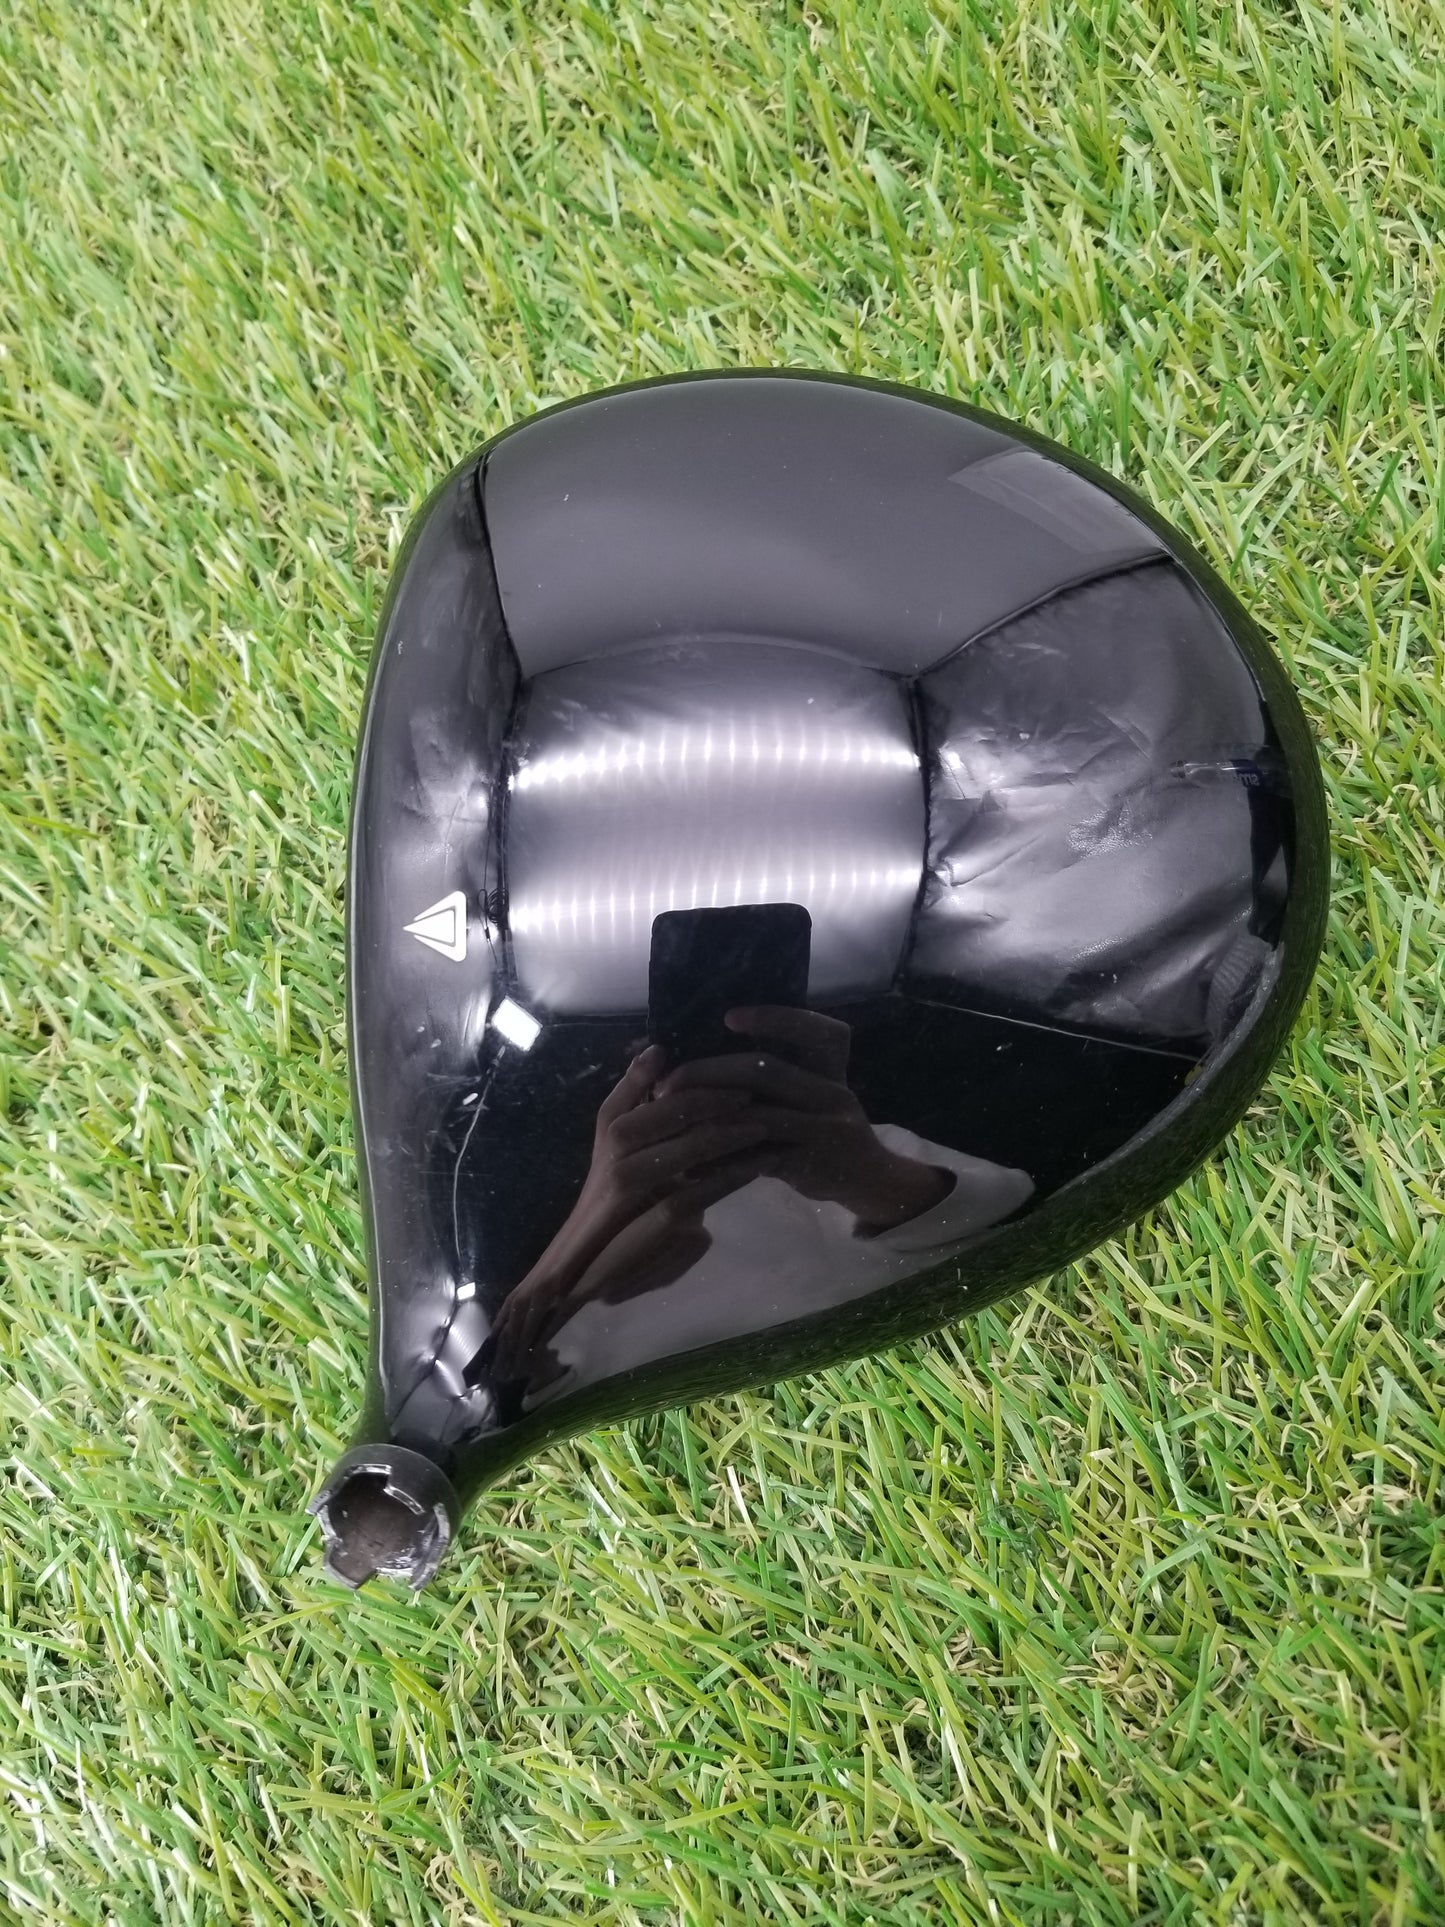 2019 TITLEIST TS1 DRIVER 10.5* CLUBHEAD ONLY GOOD